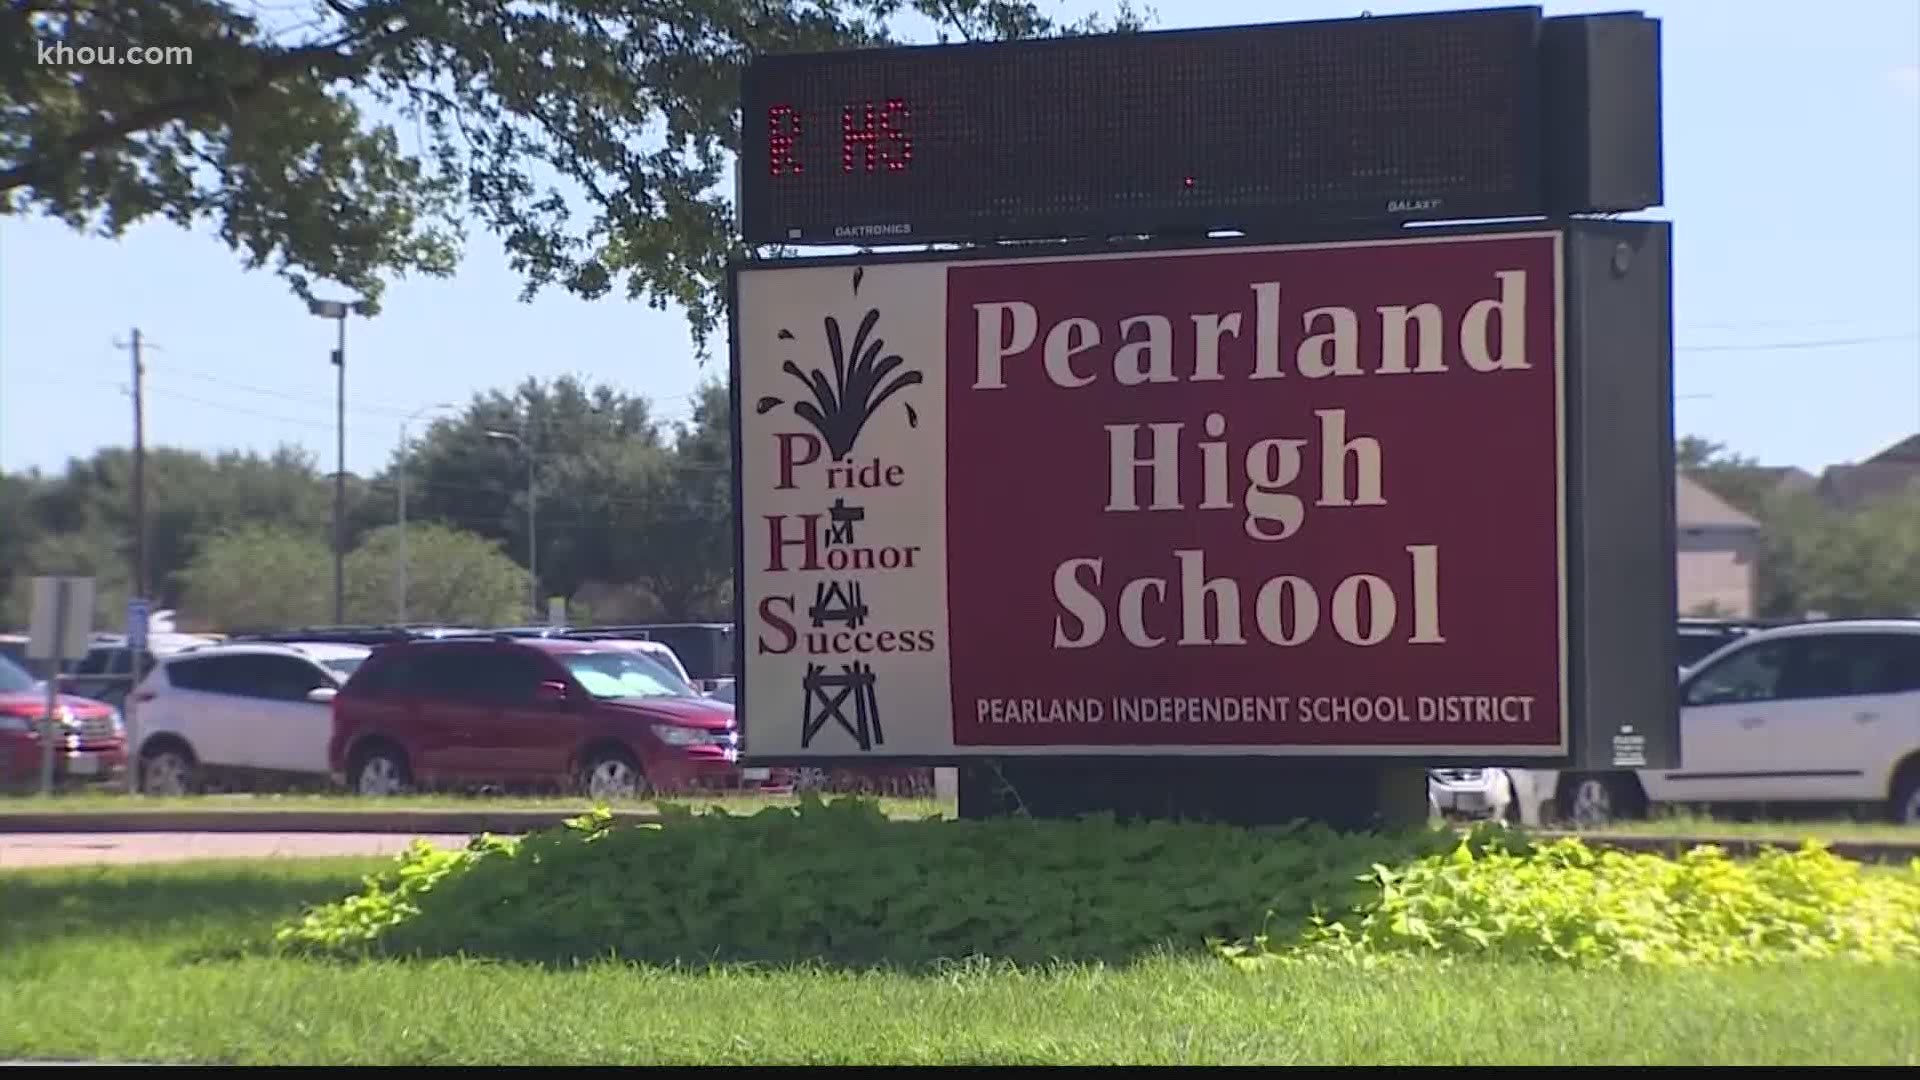 Pearland ISD released their plan for reopening schools Wednesday morning.